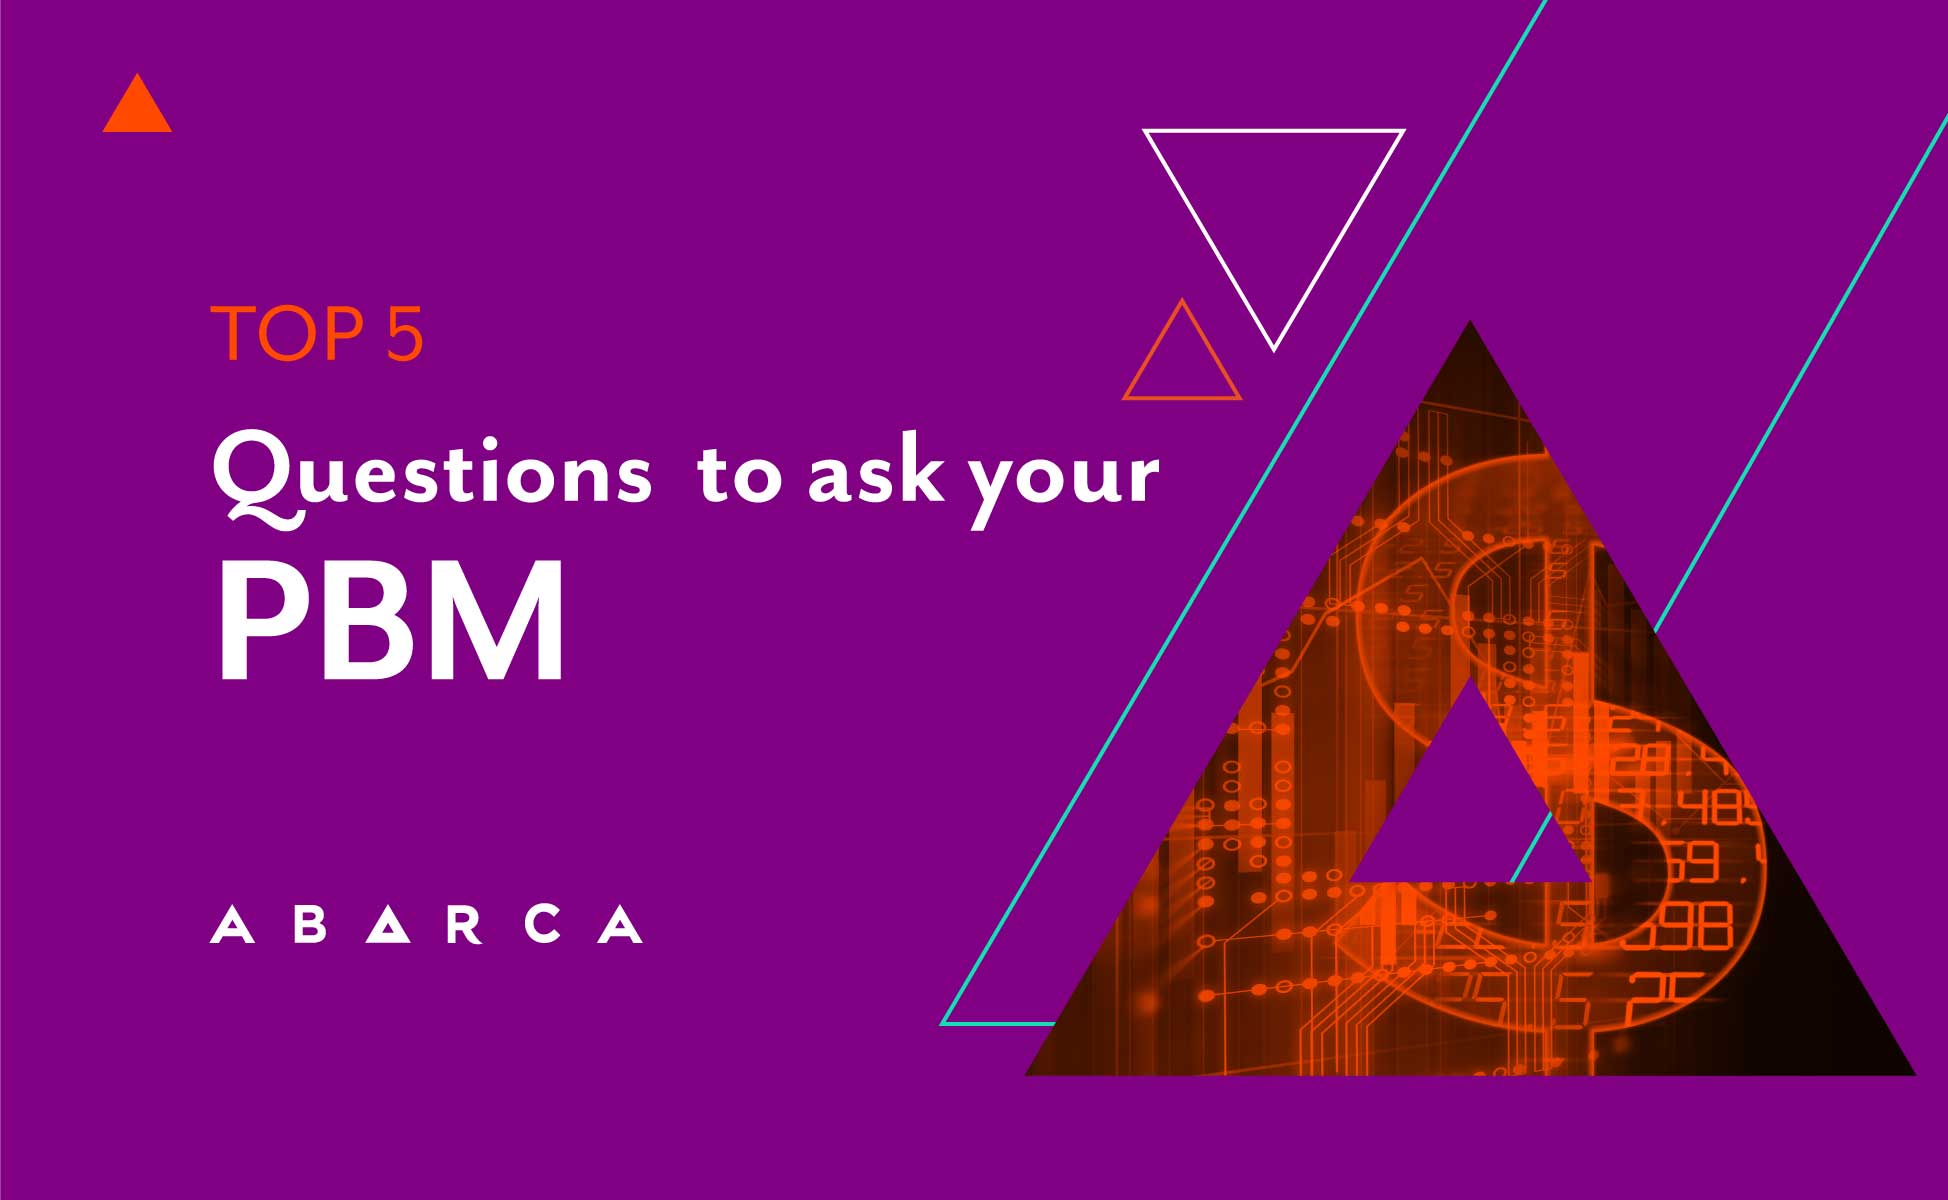 Abarca Heealth - Top 5 Questions to Ask Your PBM